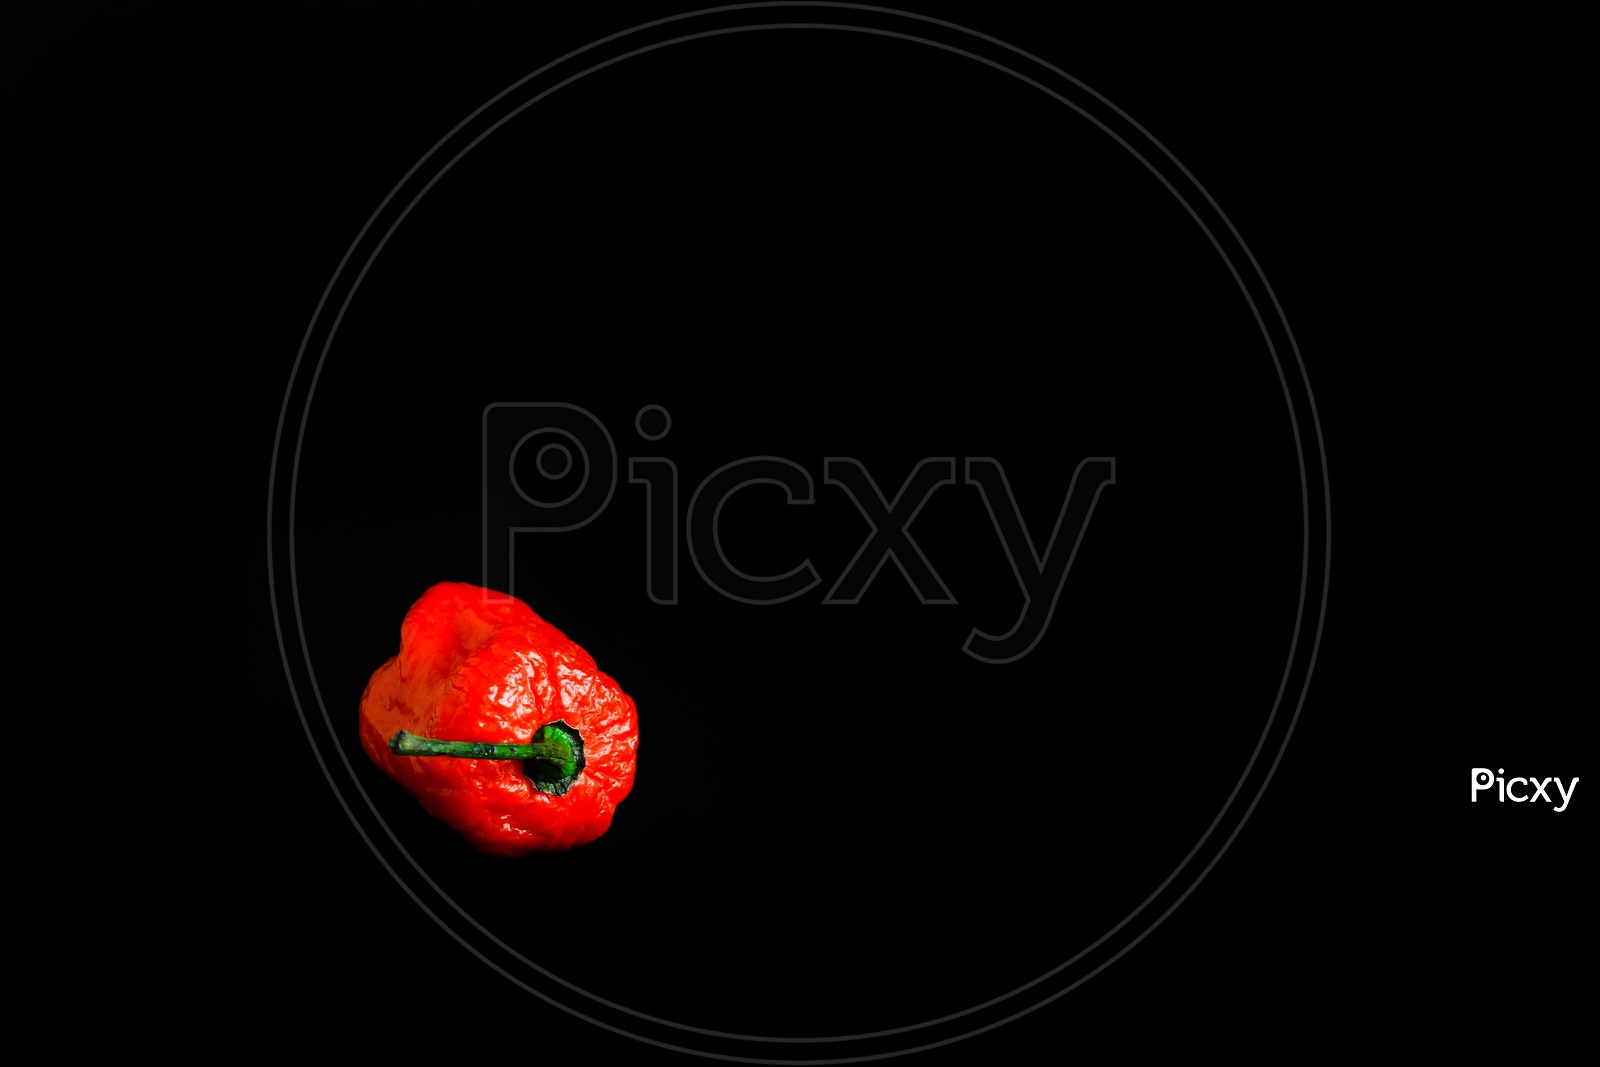 One Red Bhoot Jolokia Spicy Ghost Pepper Isolated In Black Background With Space For Text